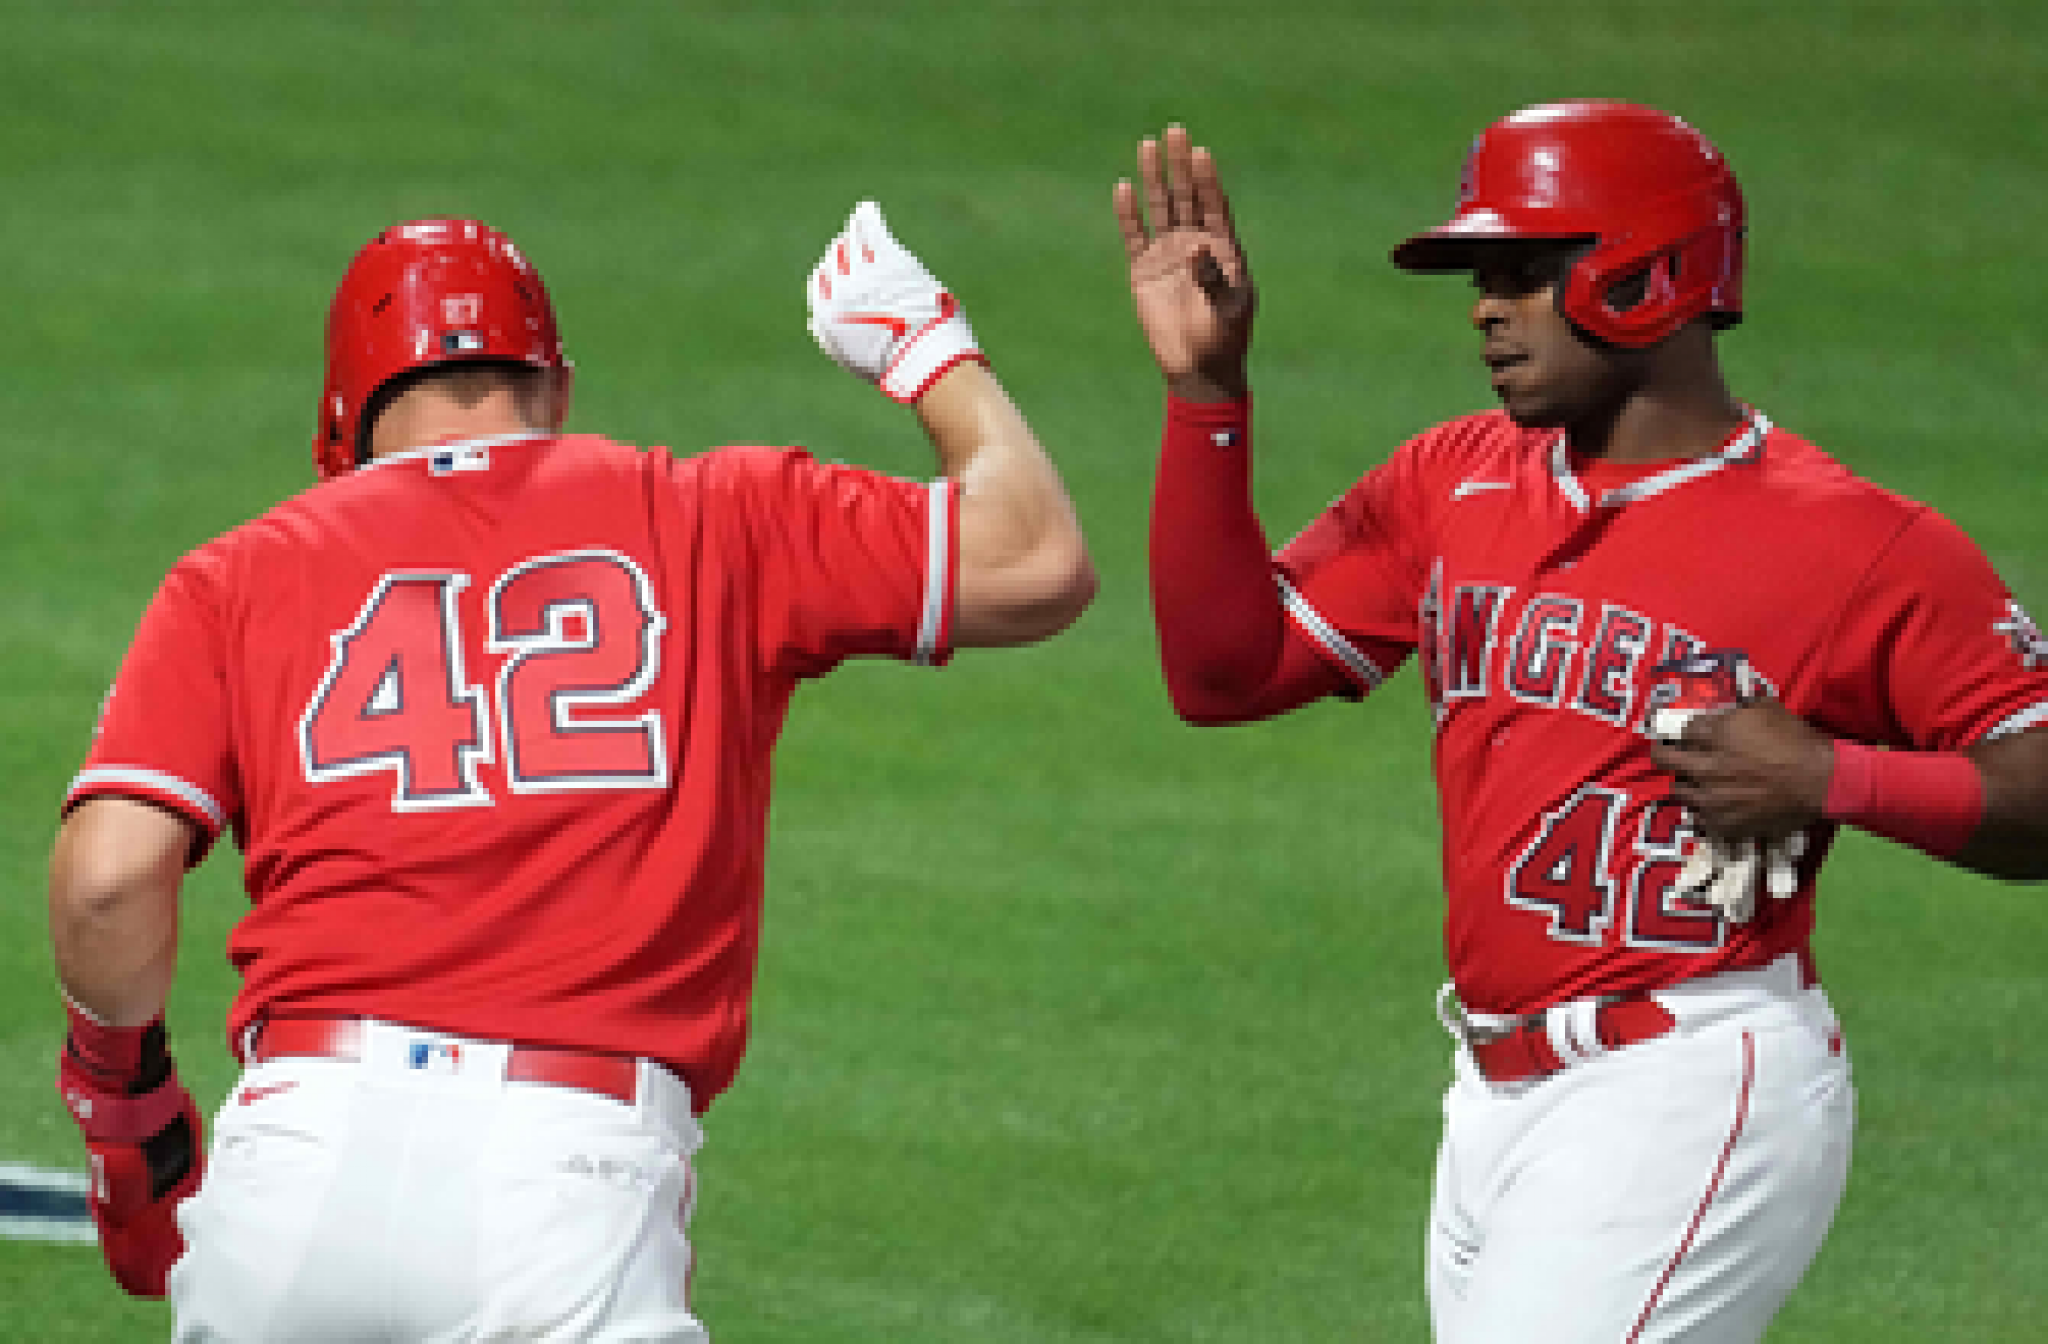 Mike Trout and Justin Upton lead the hit parade in Angels’ 10-3 victory over Twins